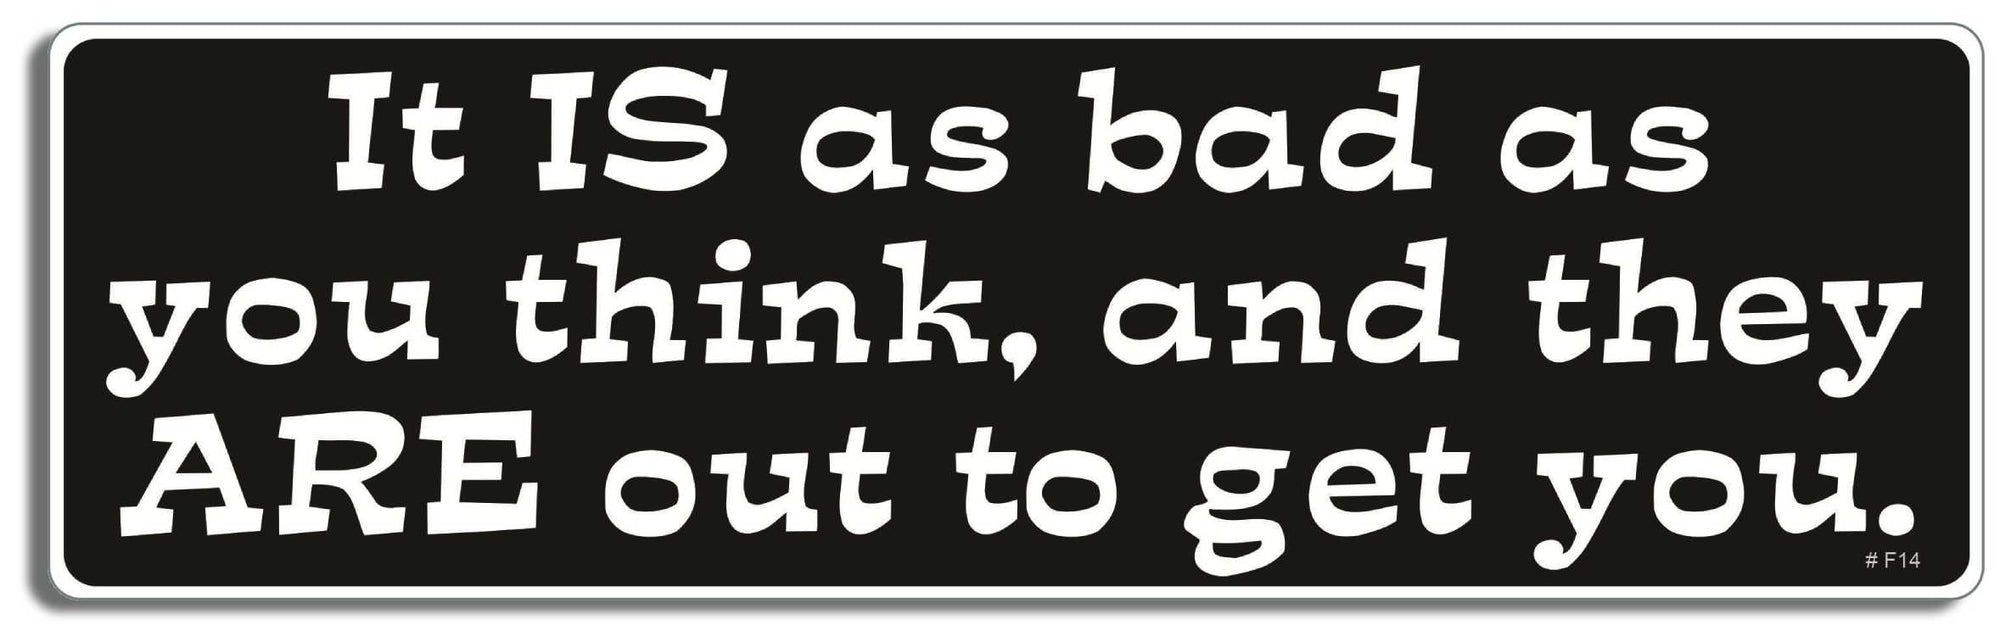 It is as bad as you think, and they are out to get you - 3" x 10" Bumper Sticker--Car Magnet- -  Decal Bumper Sticker-funny Bumper Sticker Car Magnet It is as bad as you think, and they-  Decal for cars funny, funny quote, funny saying